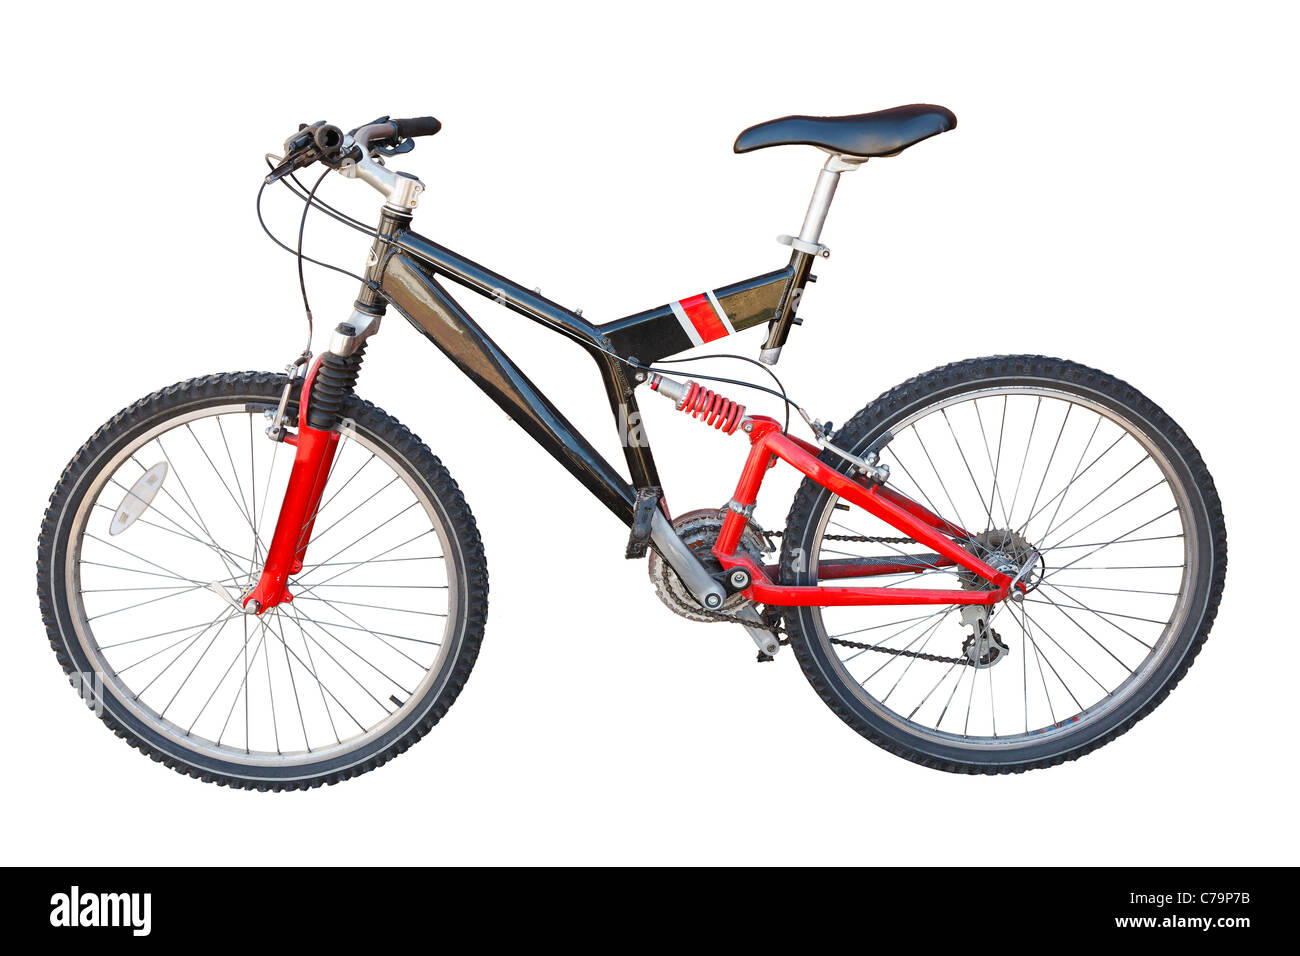 Red and Black Mountain/Off Road Bicycle Isolated on white with work path Stock Photo